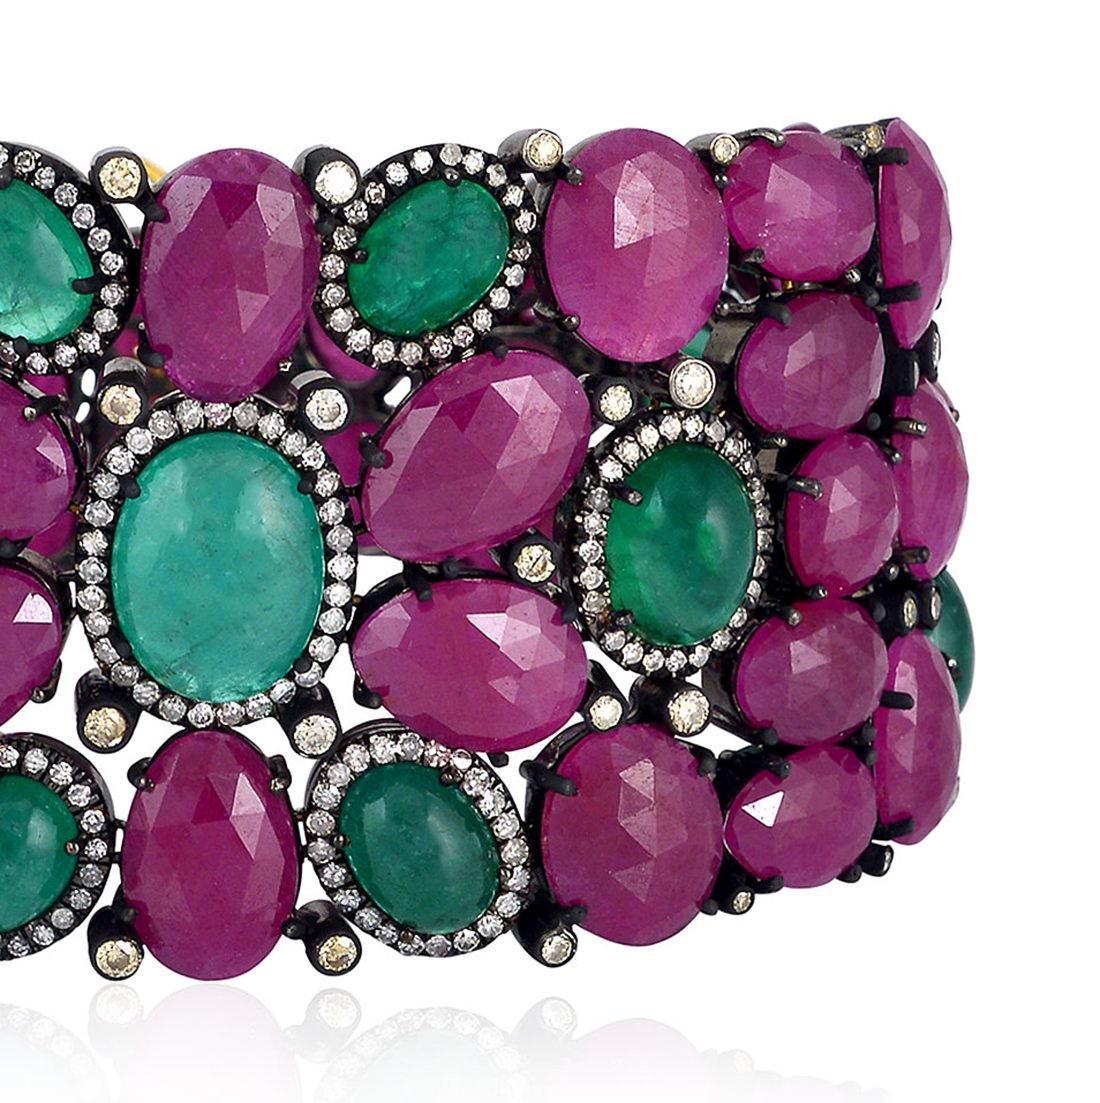 Baroque 139 Carats Natural Ruby Emerald & Diamond Bracelet 18k Gold & Silver For Sale 6